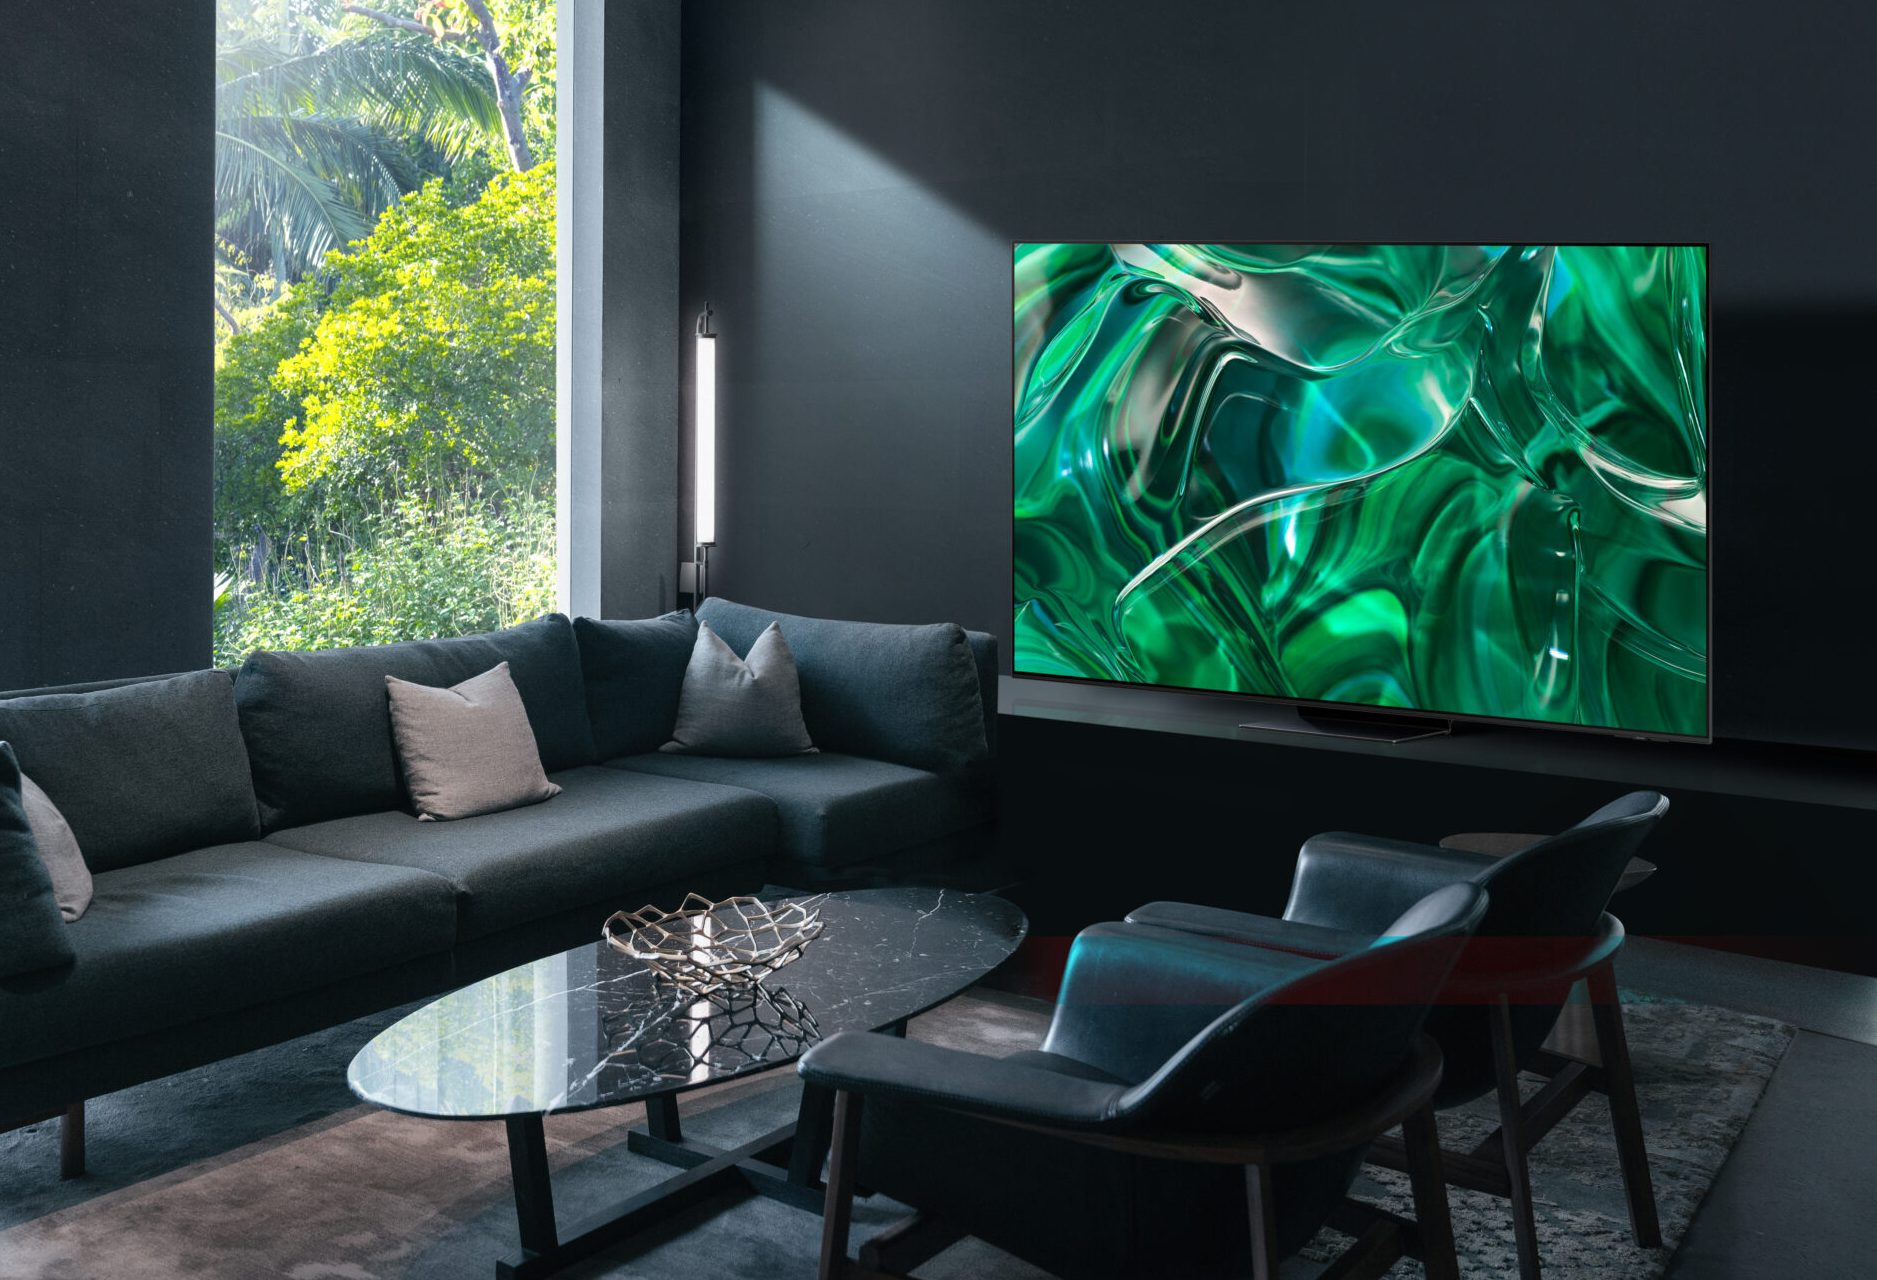 Every size LG C2 OLED TV is on sale before the Super Bowl: Save up to $1400